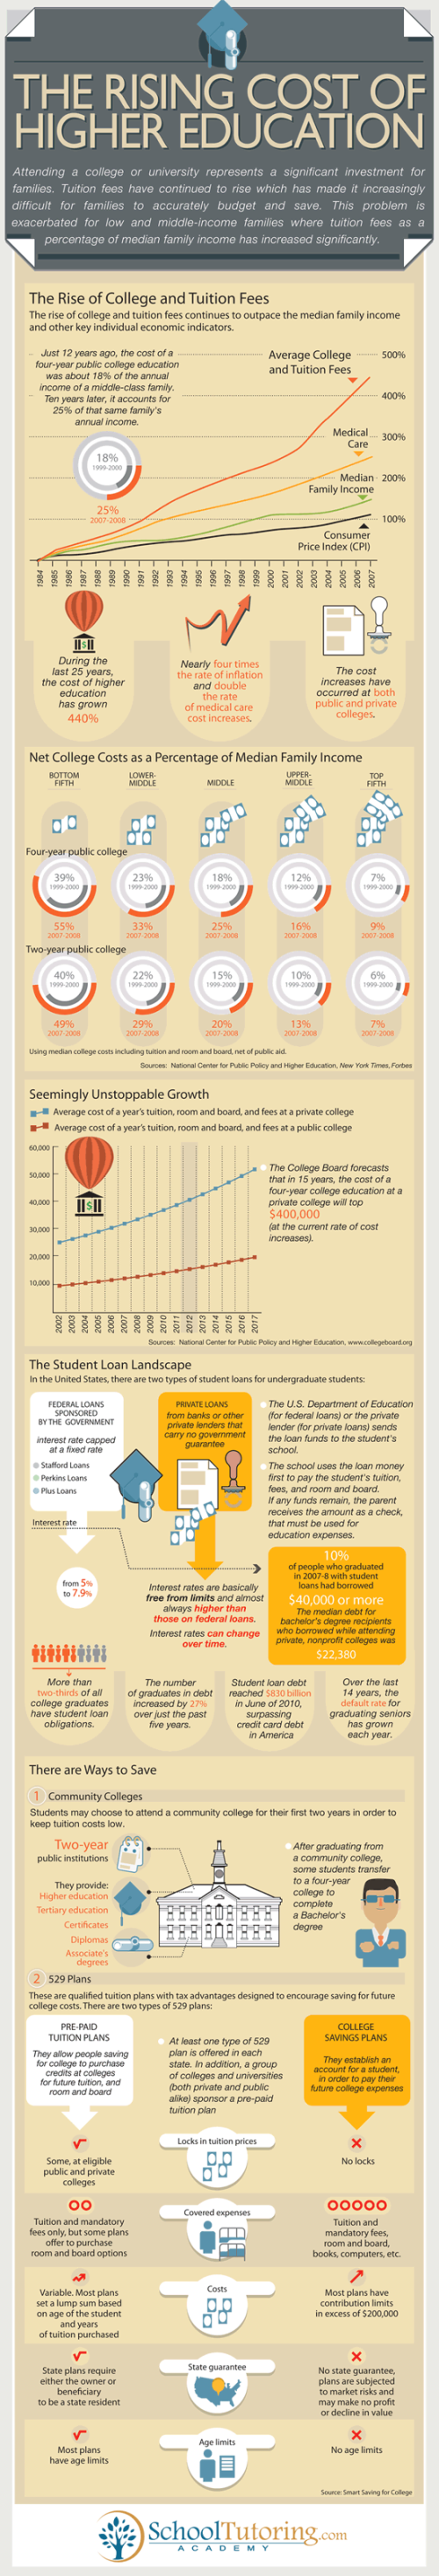 The Rising Cost of Higher Education infographic